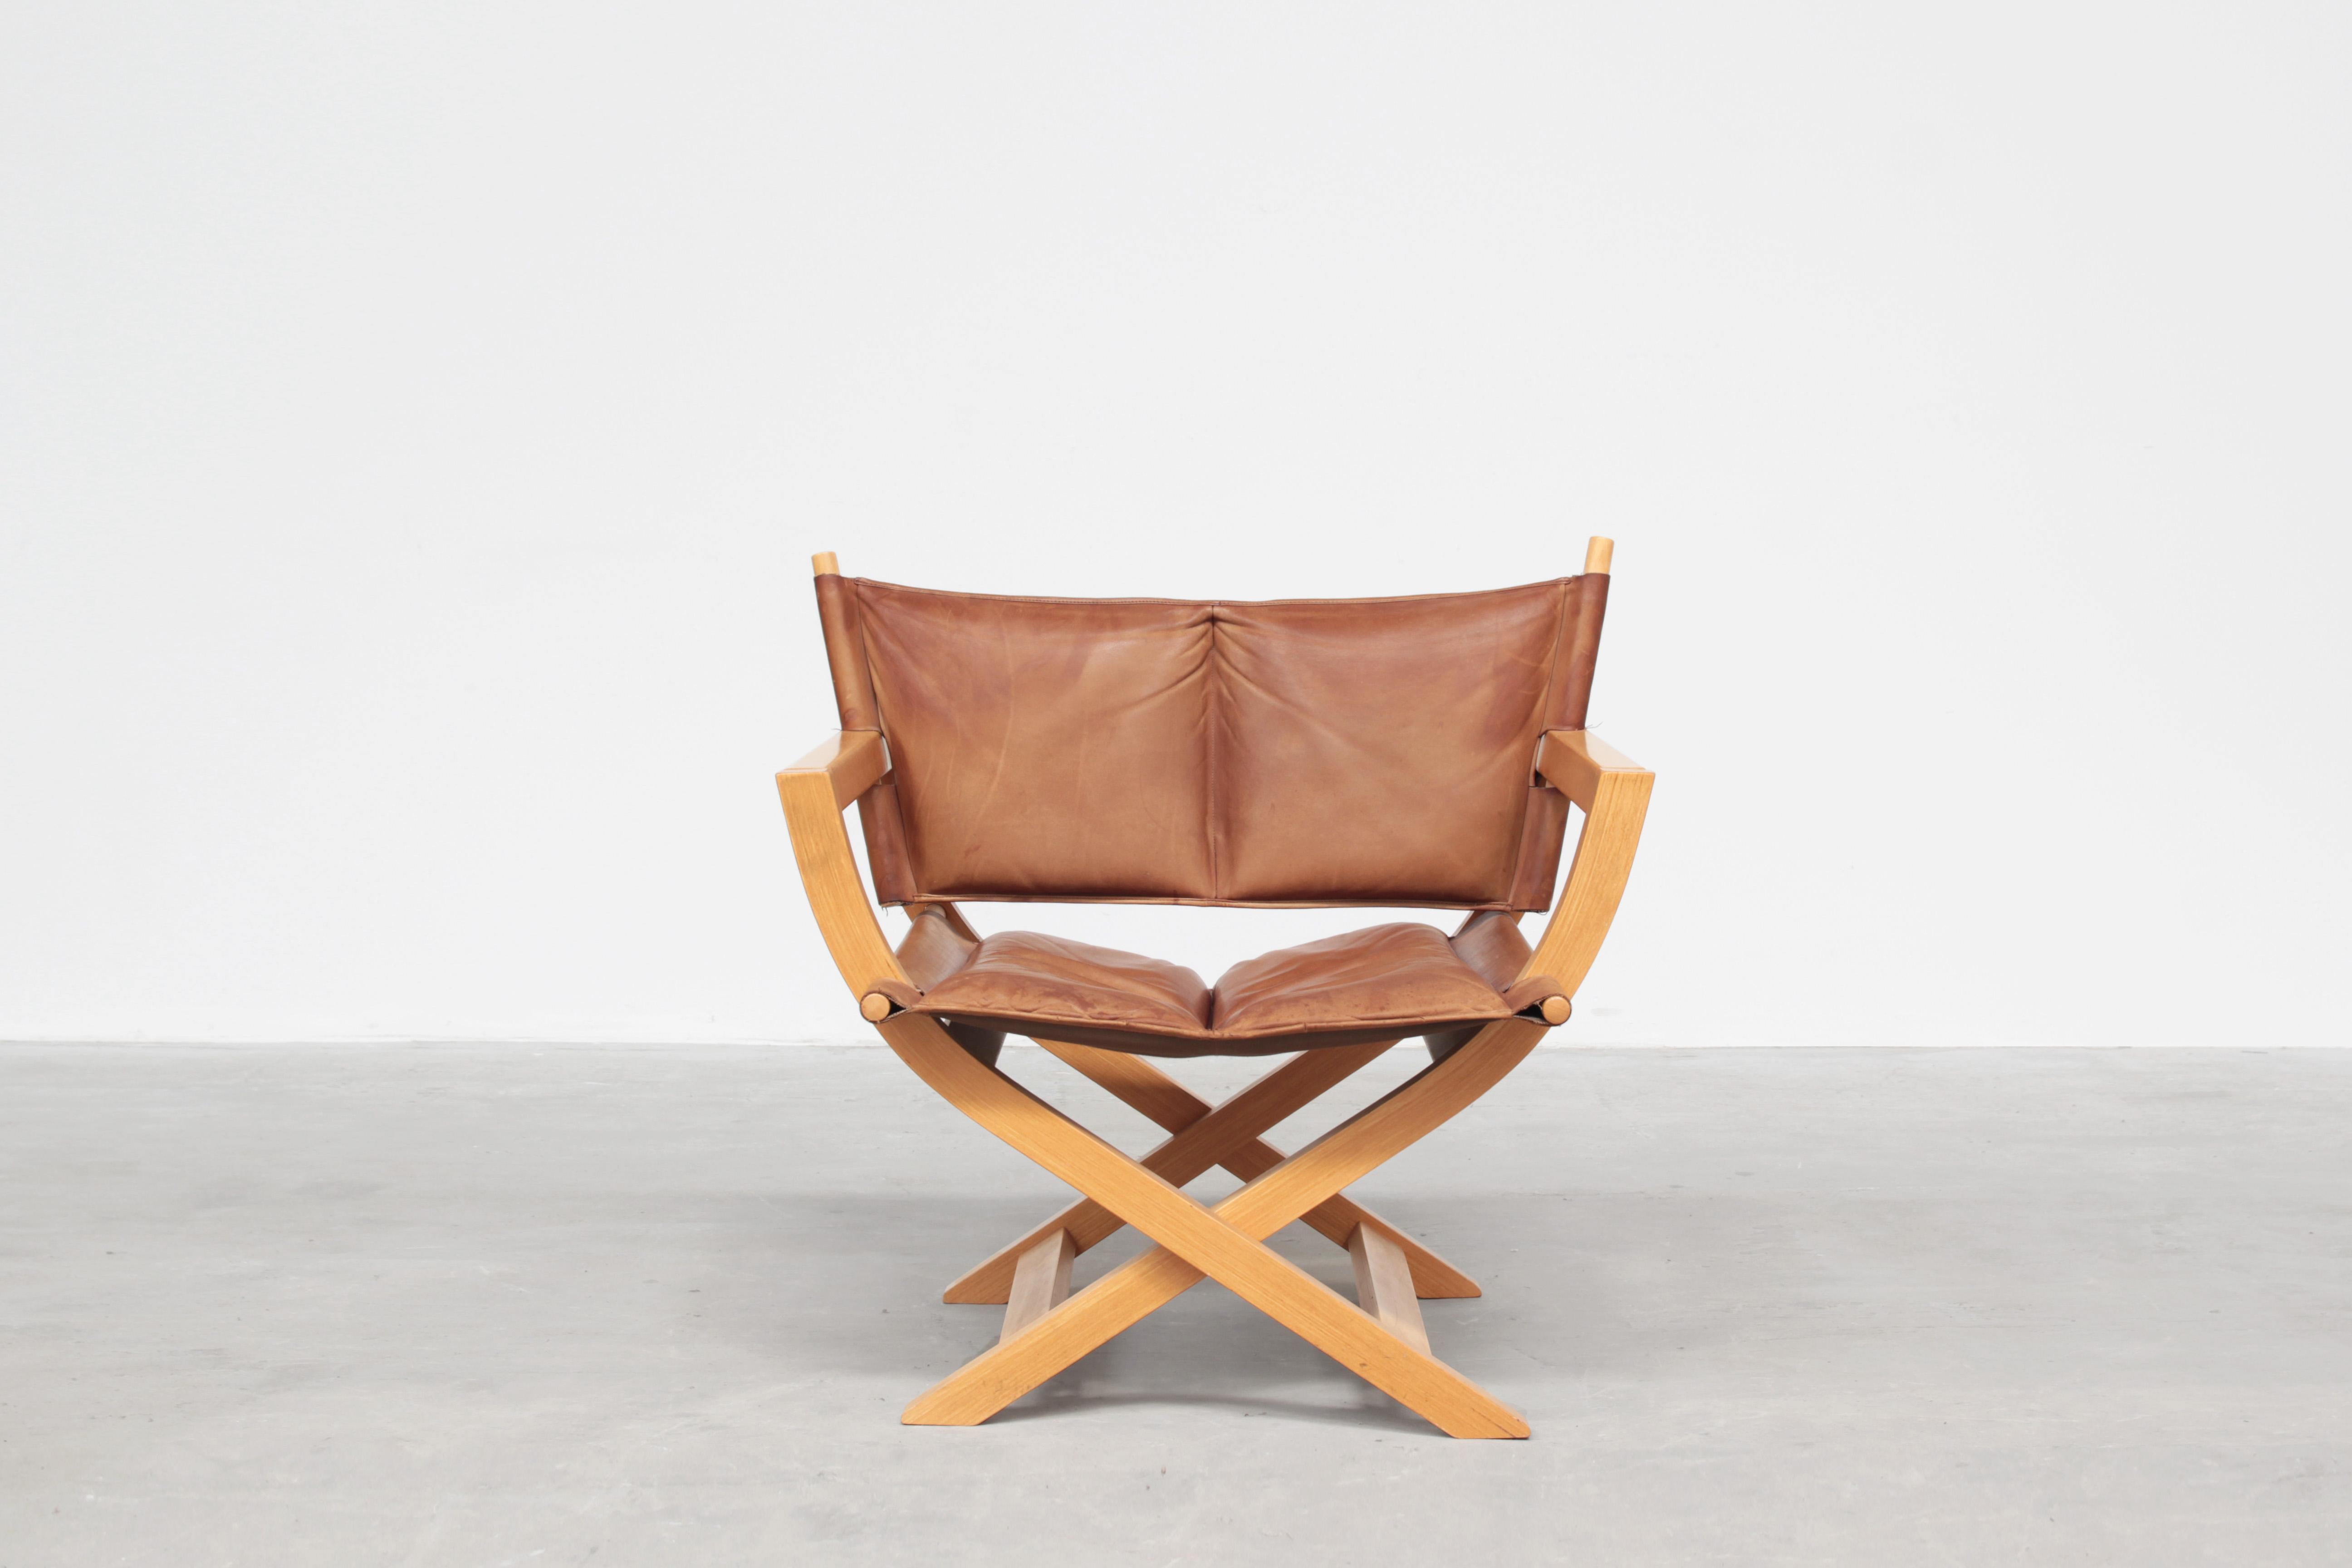 Pair of Danish Lounge Chairs made by Westnofa, Attributed to Børge Mogensen 1